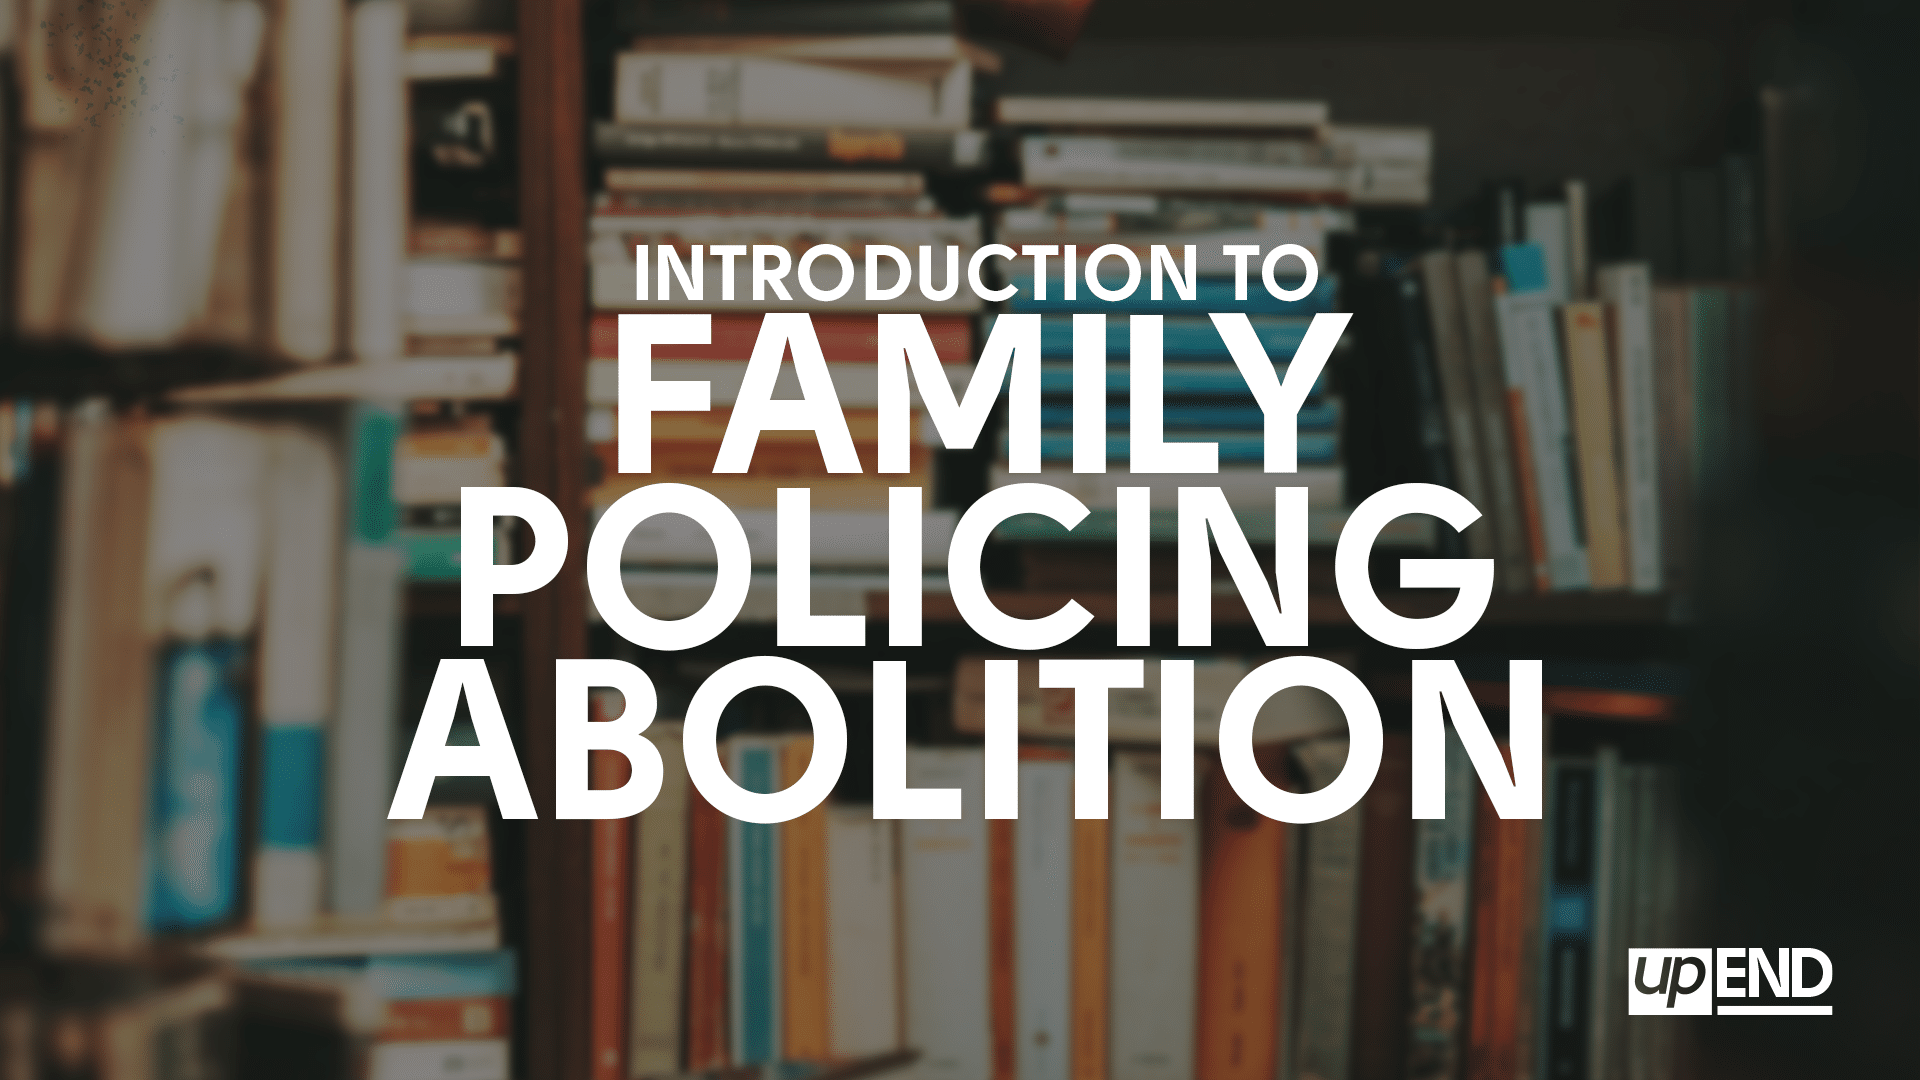 Introduction to Family Policing Abolition